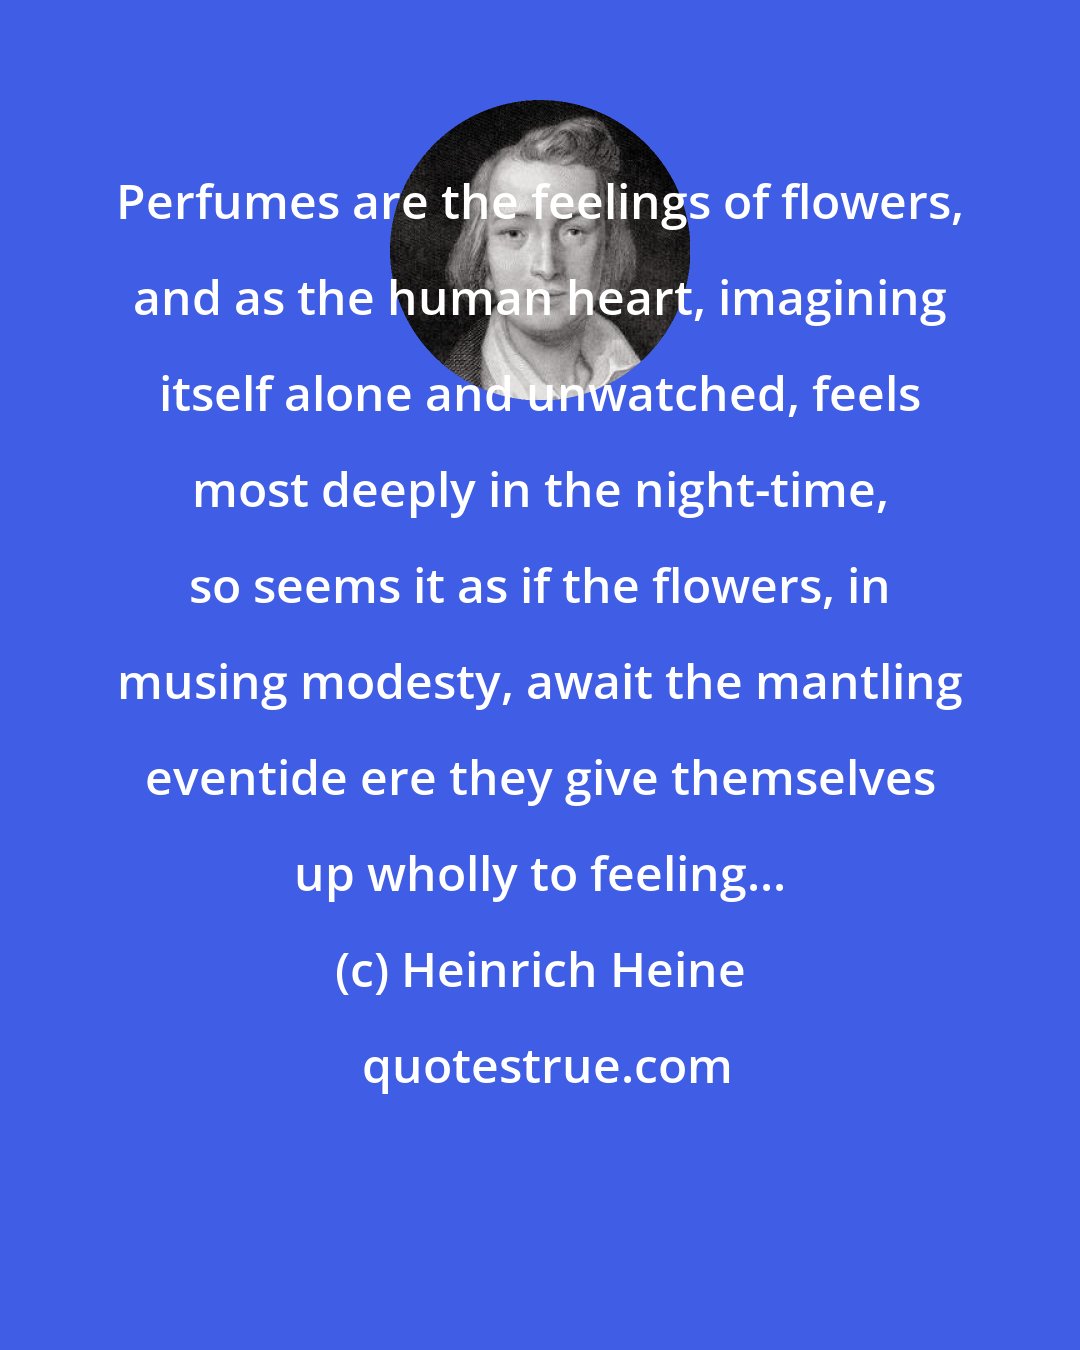 Heinrich Heine: Perfumes are the feelings of flowers, and as the human heart, imagining itself alone and unwatched, feels most deeply in the night-time, so seems it as if the flowers, in musing modesty, await the mantling eventide ere they give themselves up wholly to feeling...